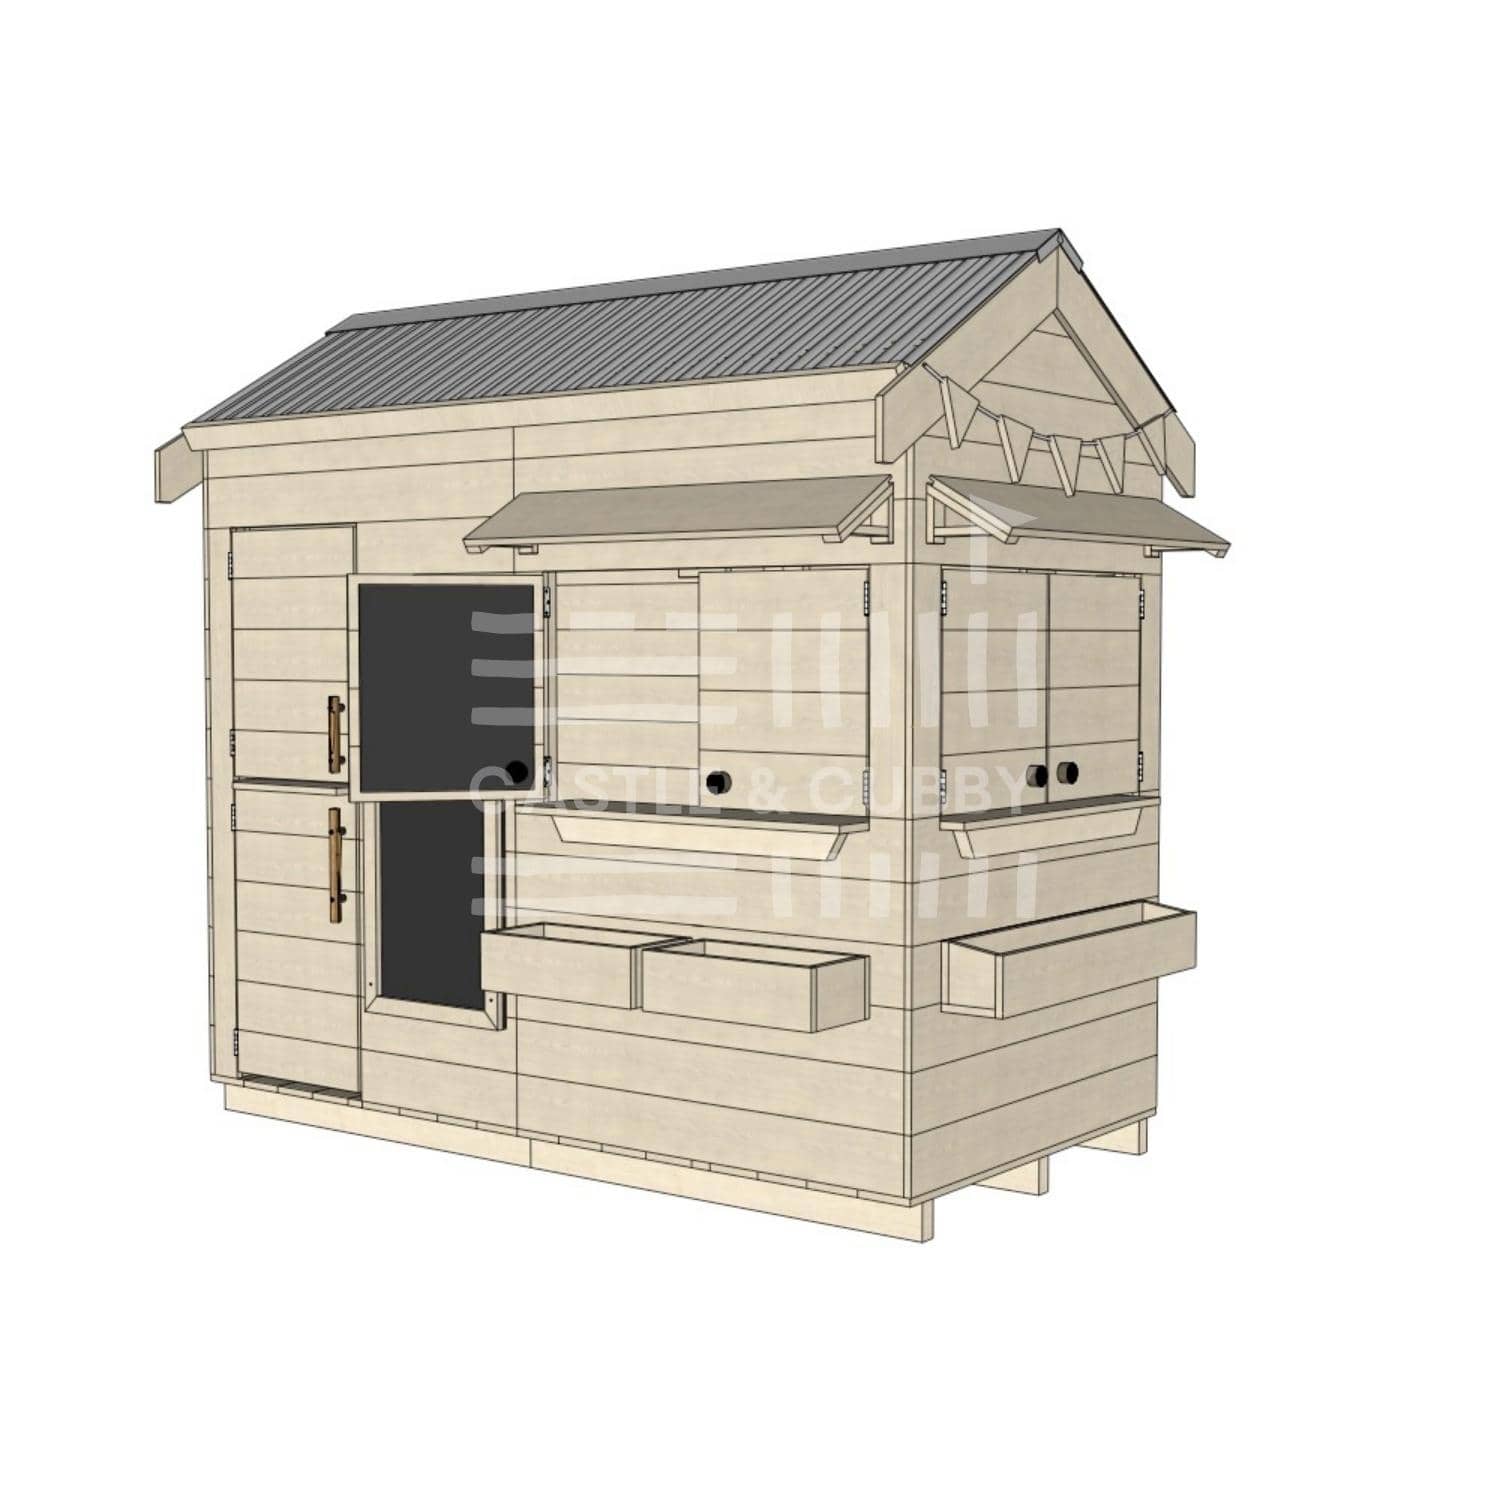 Pitched roof raw pine timber extended height cubby house residential and family homes midi rectangle accessories